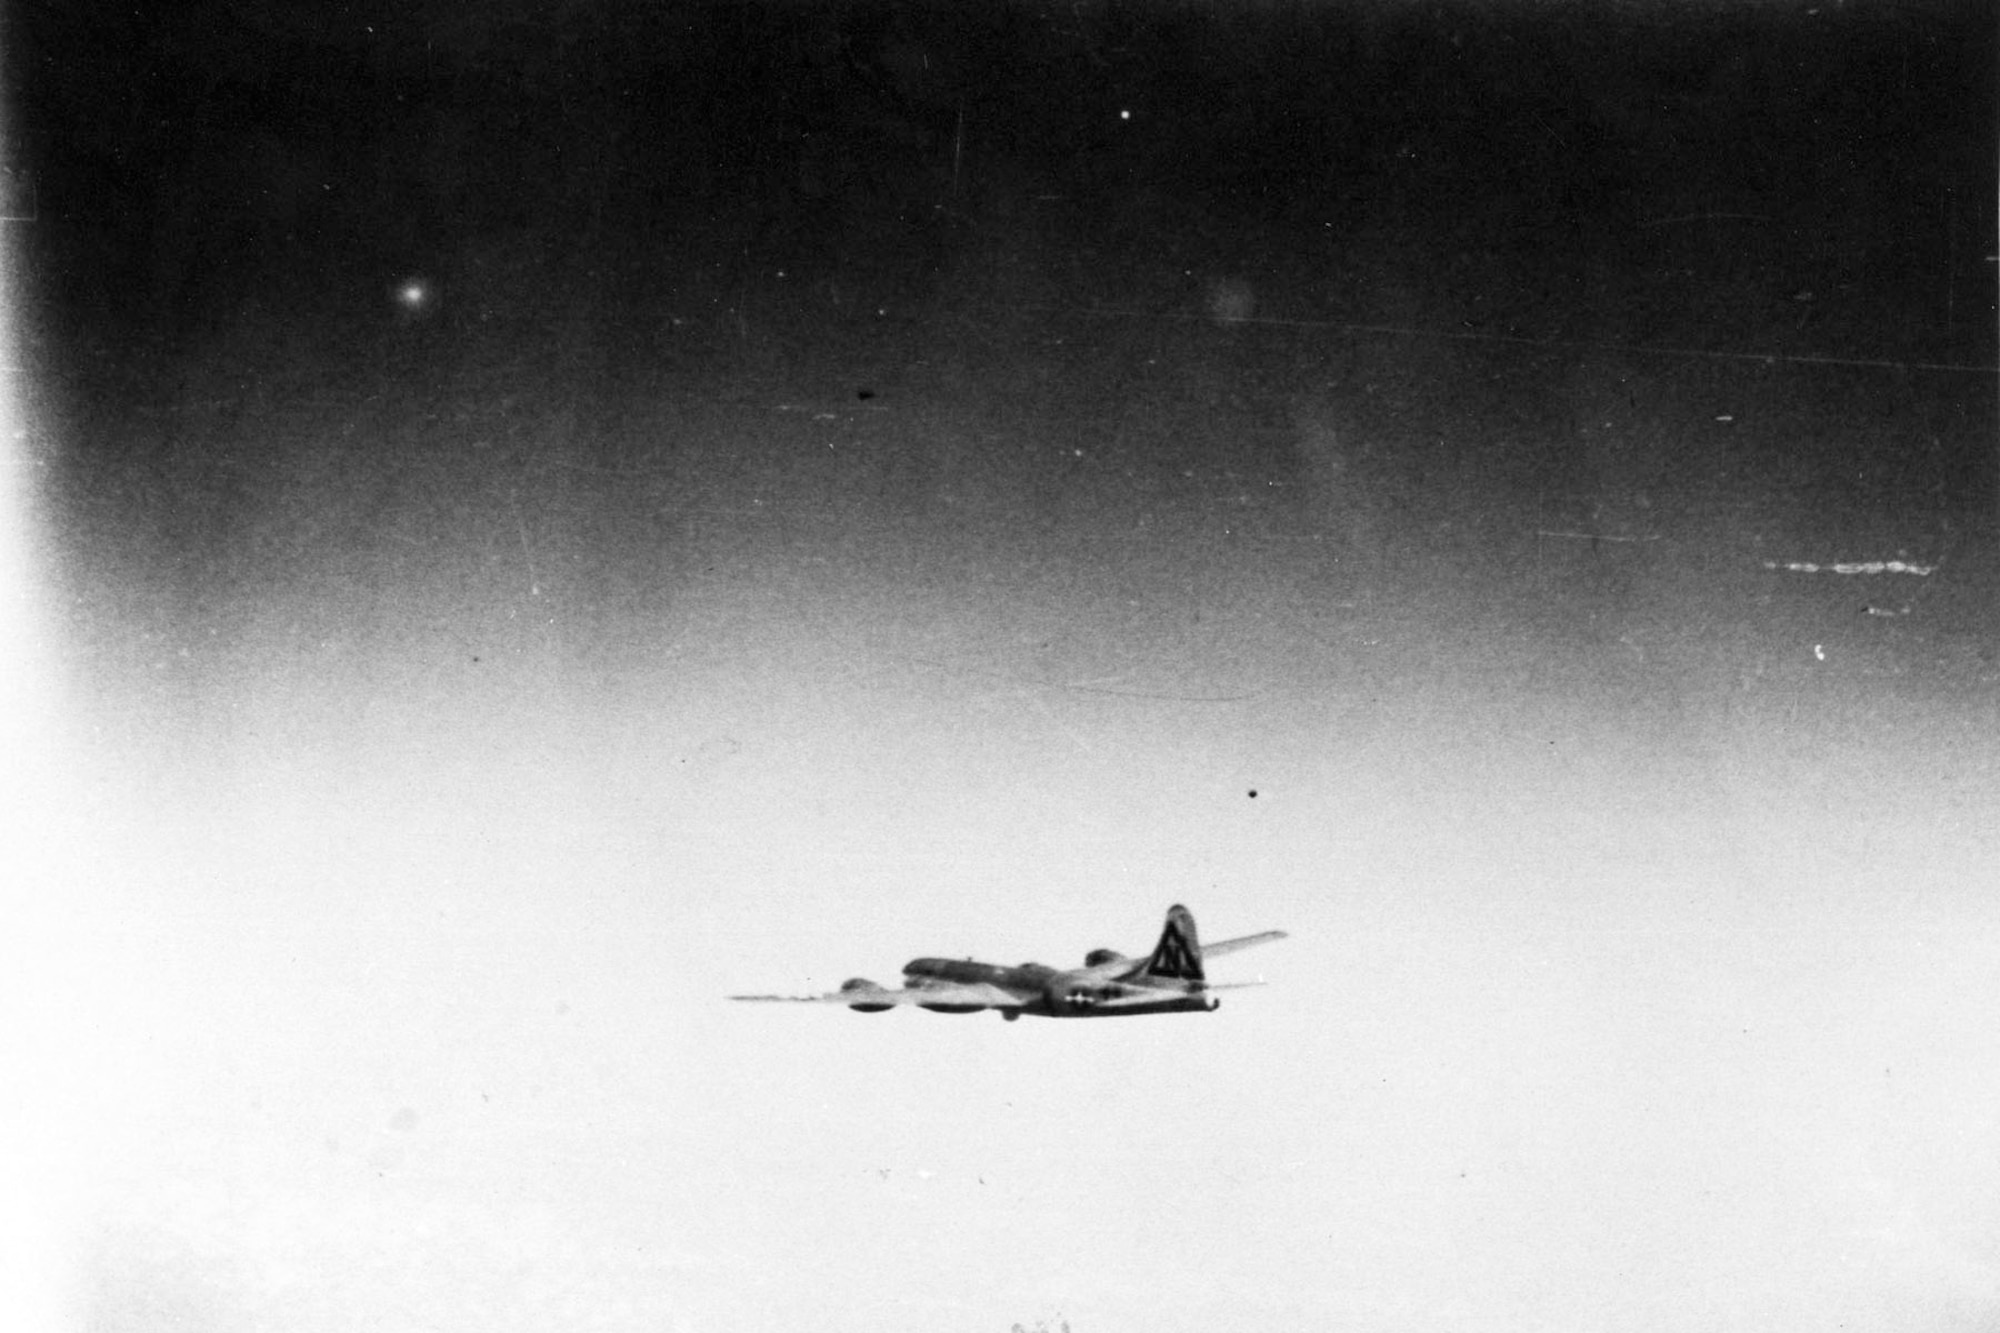 "Bockscar" en route to Japan with the atomic bomb on board. (U.S. Air Force photo)